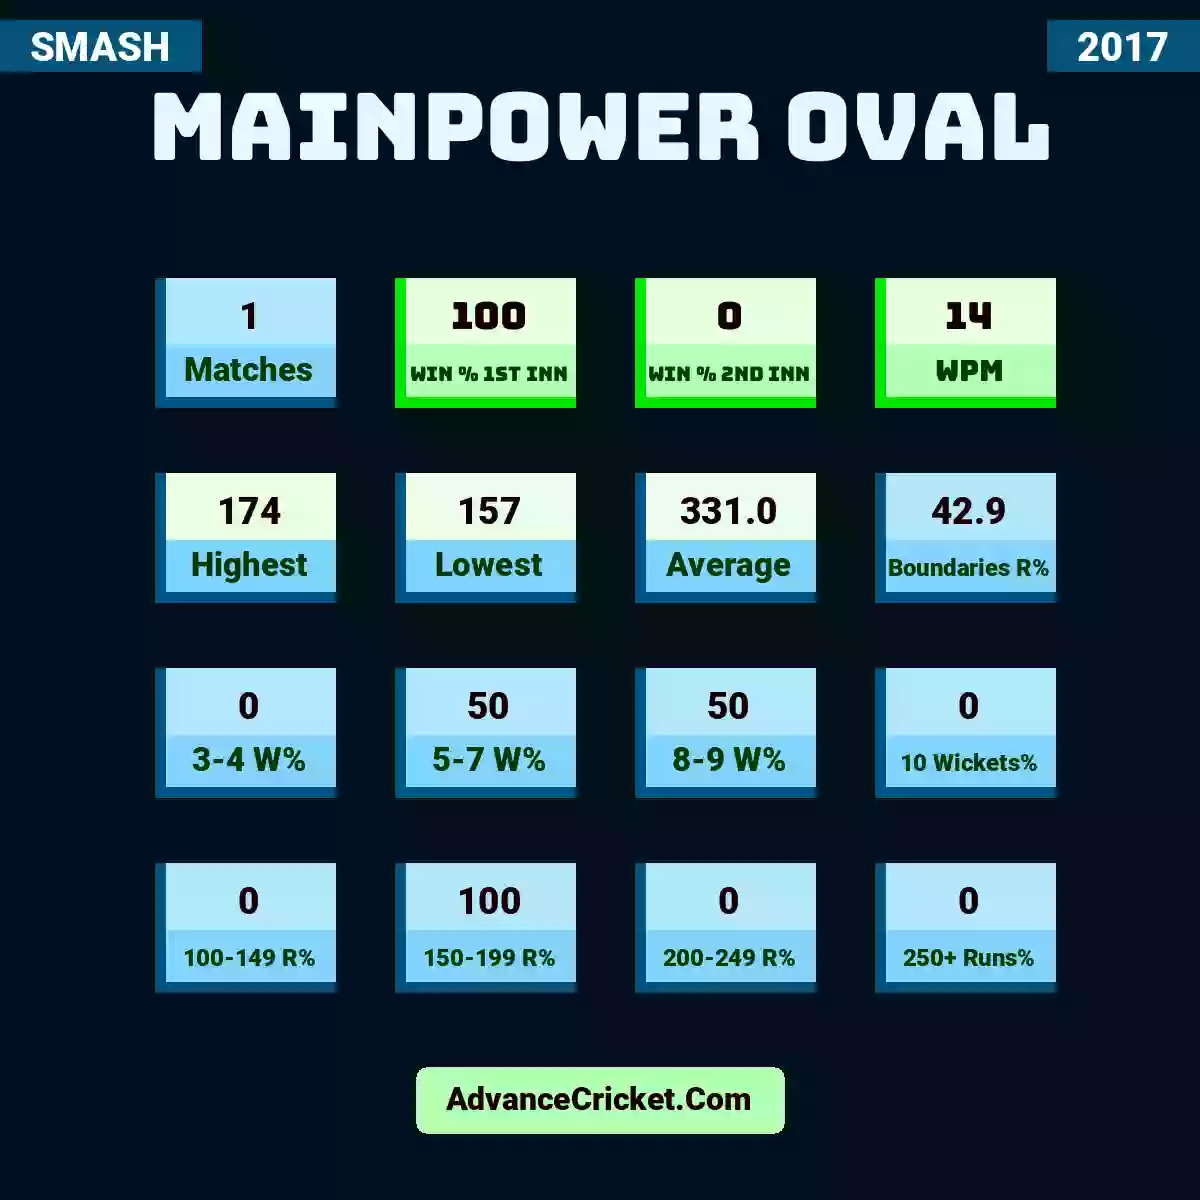 Image showing Mainpower Oval with Matches: 1, Win % 1st Inn: 100, Win % 2nd Inn: 0, WPM: 14, Highest: 174, Lowest: 157, Average: 331.0, Boundaries R%: 42.9, 3-4 W%: 0, 5-7 W%: 50, 8-9 W%: 50, 10 Wickets%: 0, 100-149 R%: 0, 150-199 R%: 100, 200-249 R%: 0, 250+ Runs%: 0.